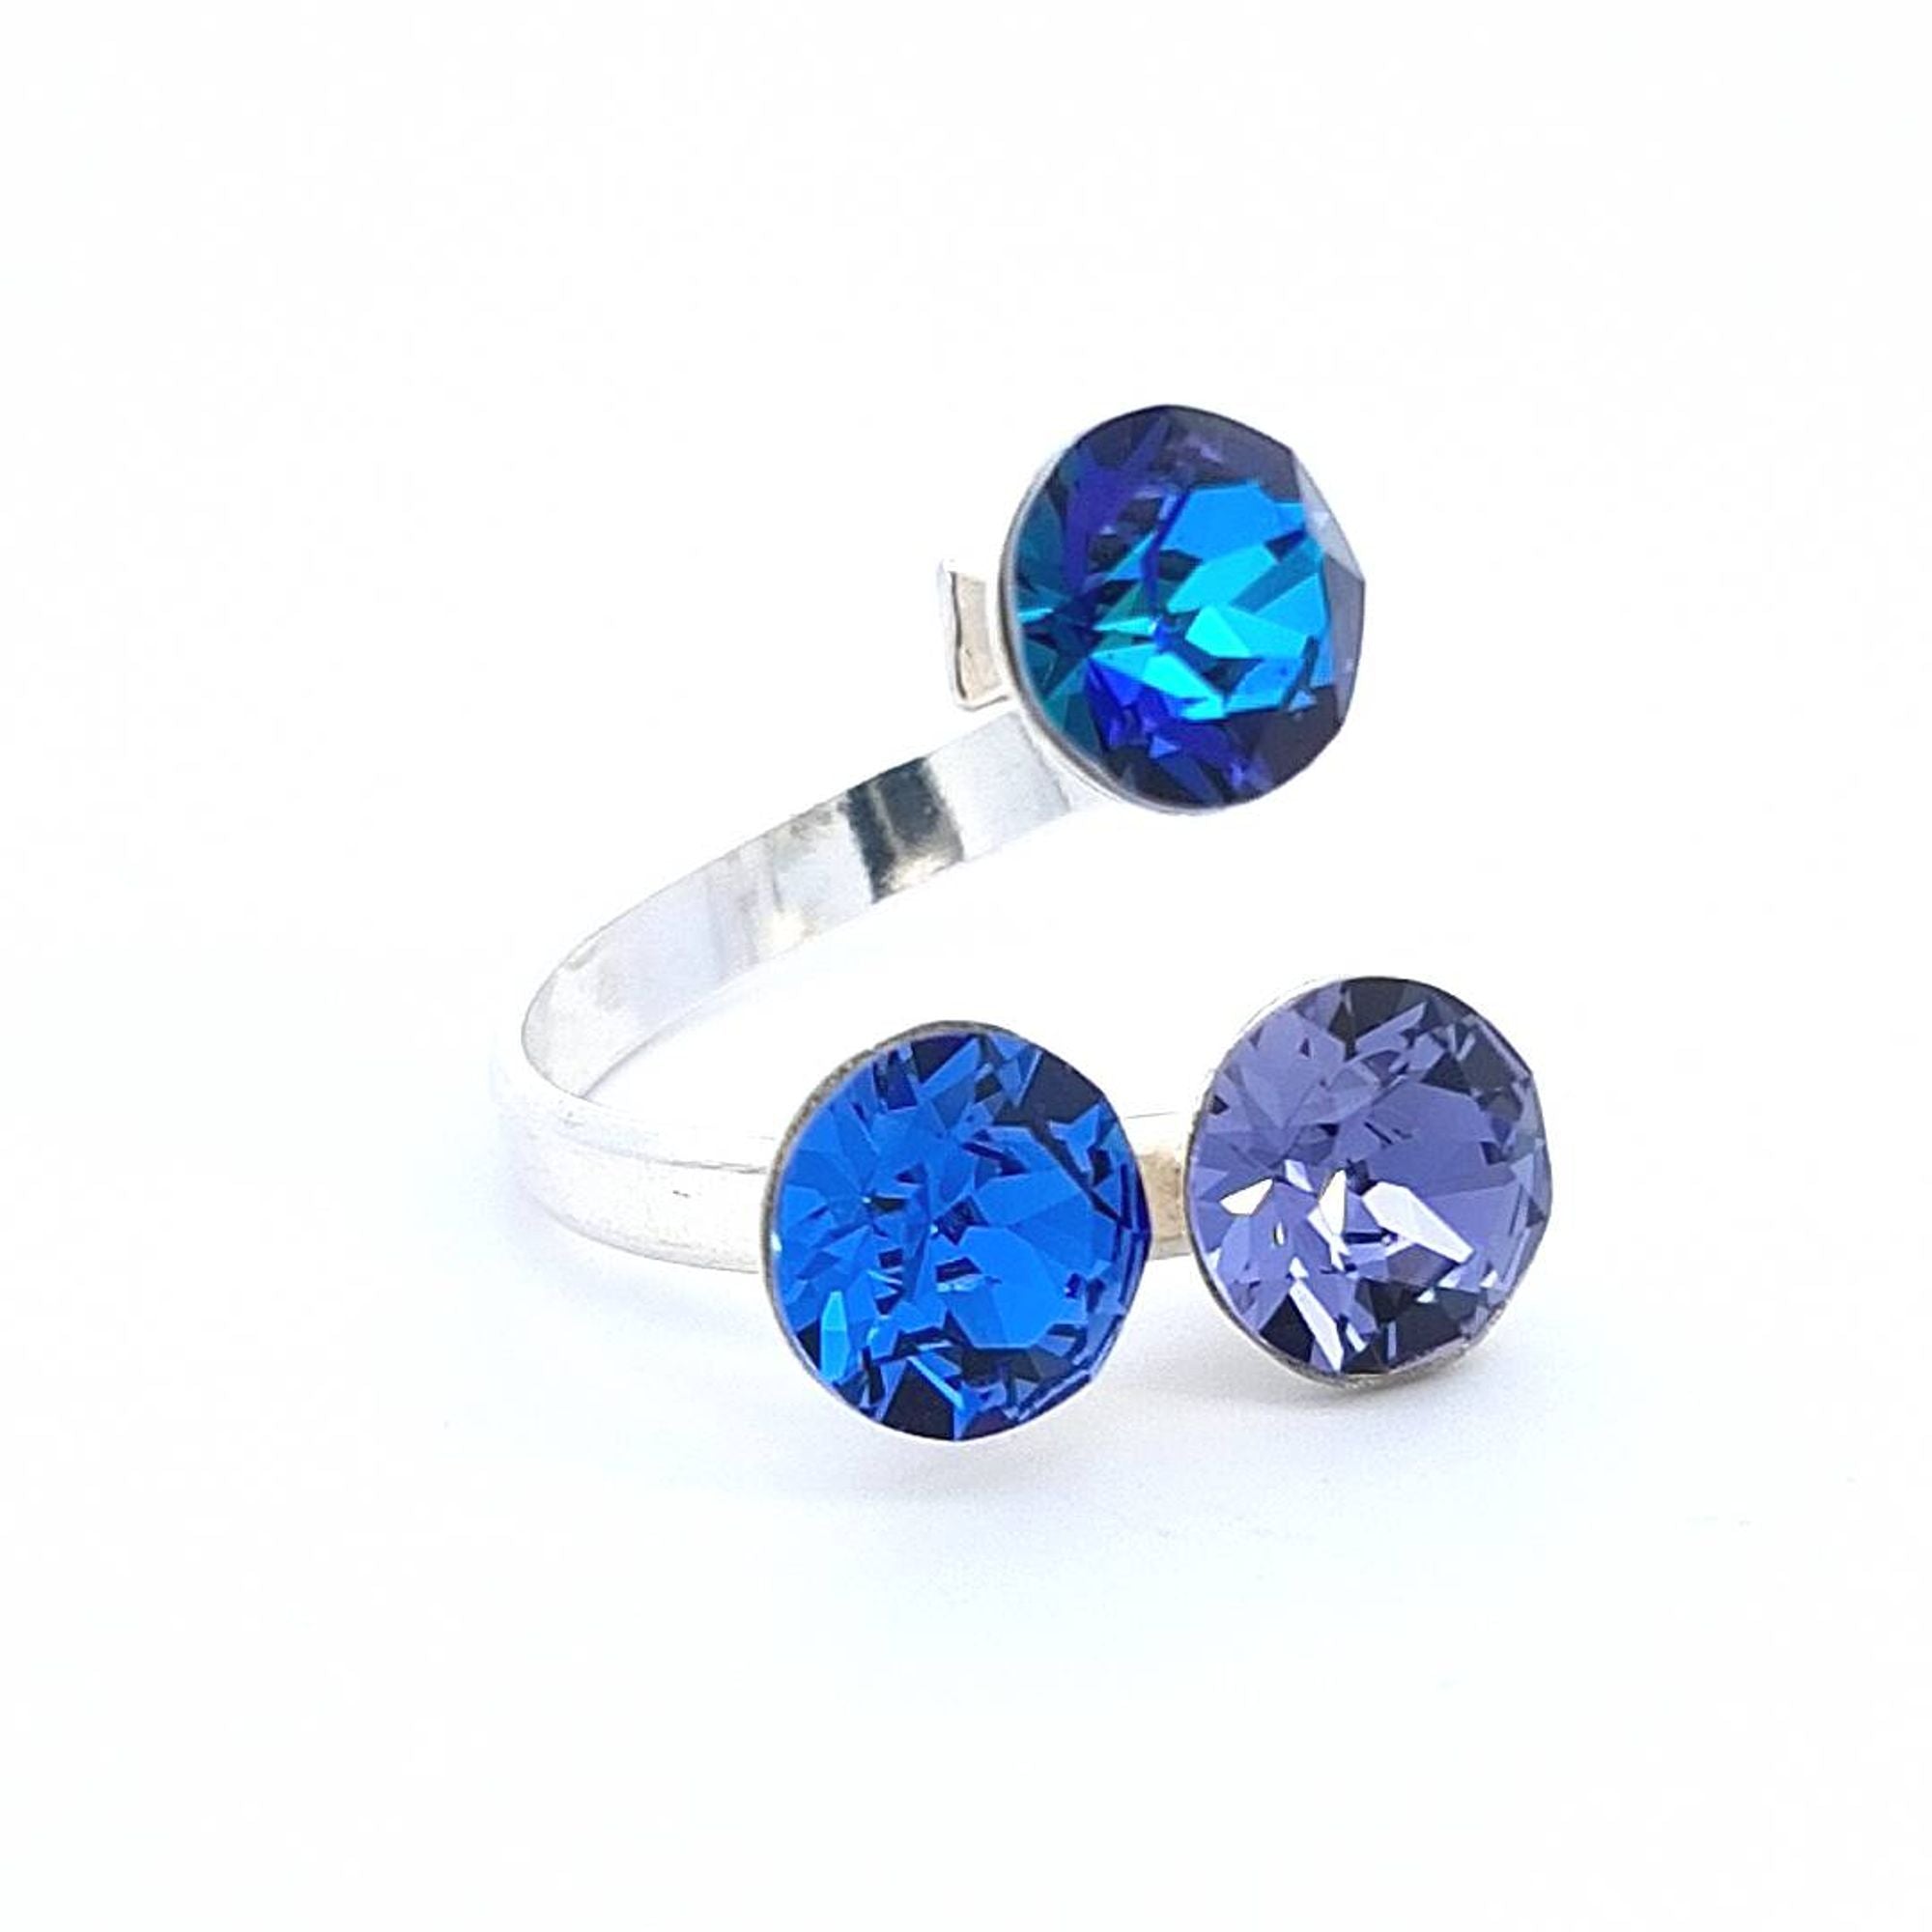 Triad Treasure Cluster Ring in Sterling Silver with Dazzling Blue-Purple Crystals by Magpie Gems